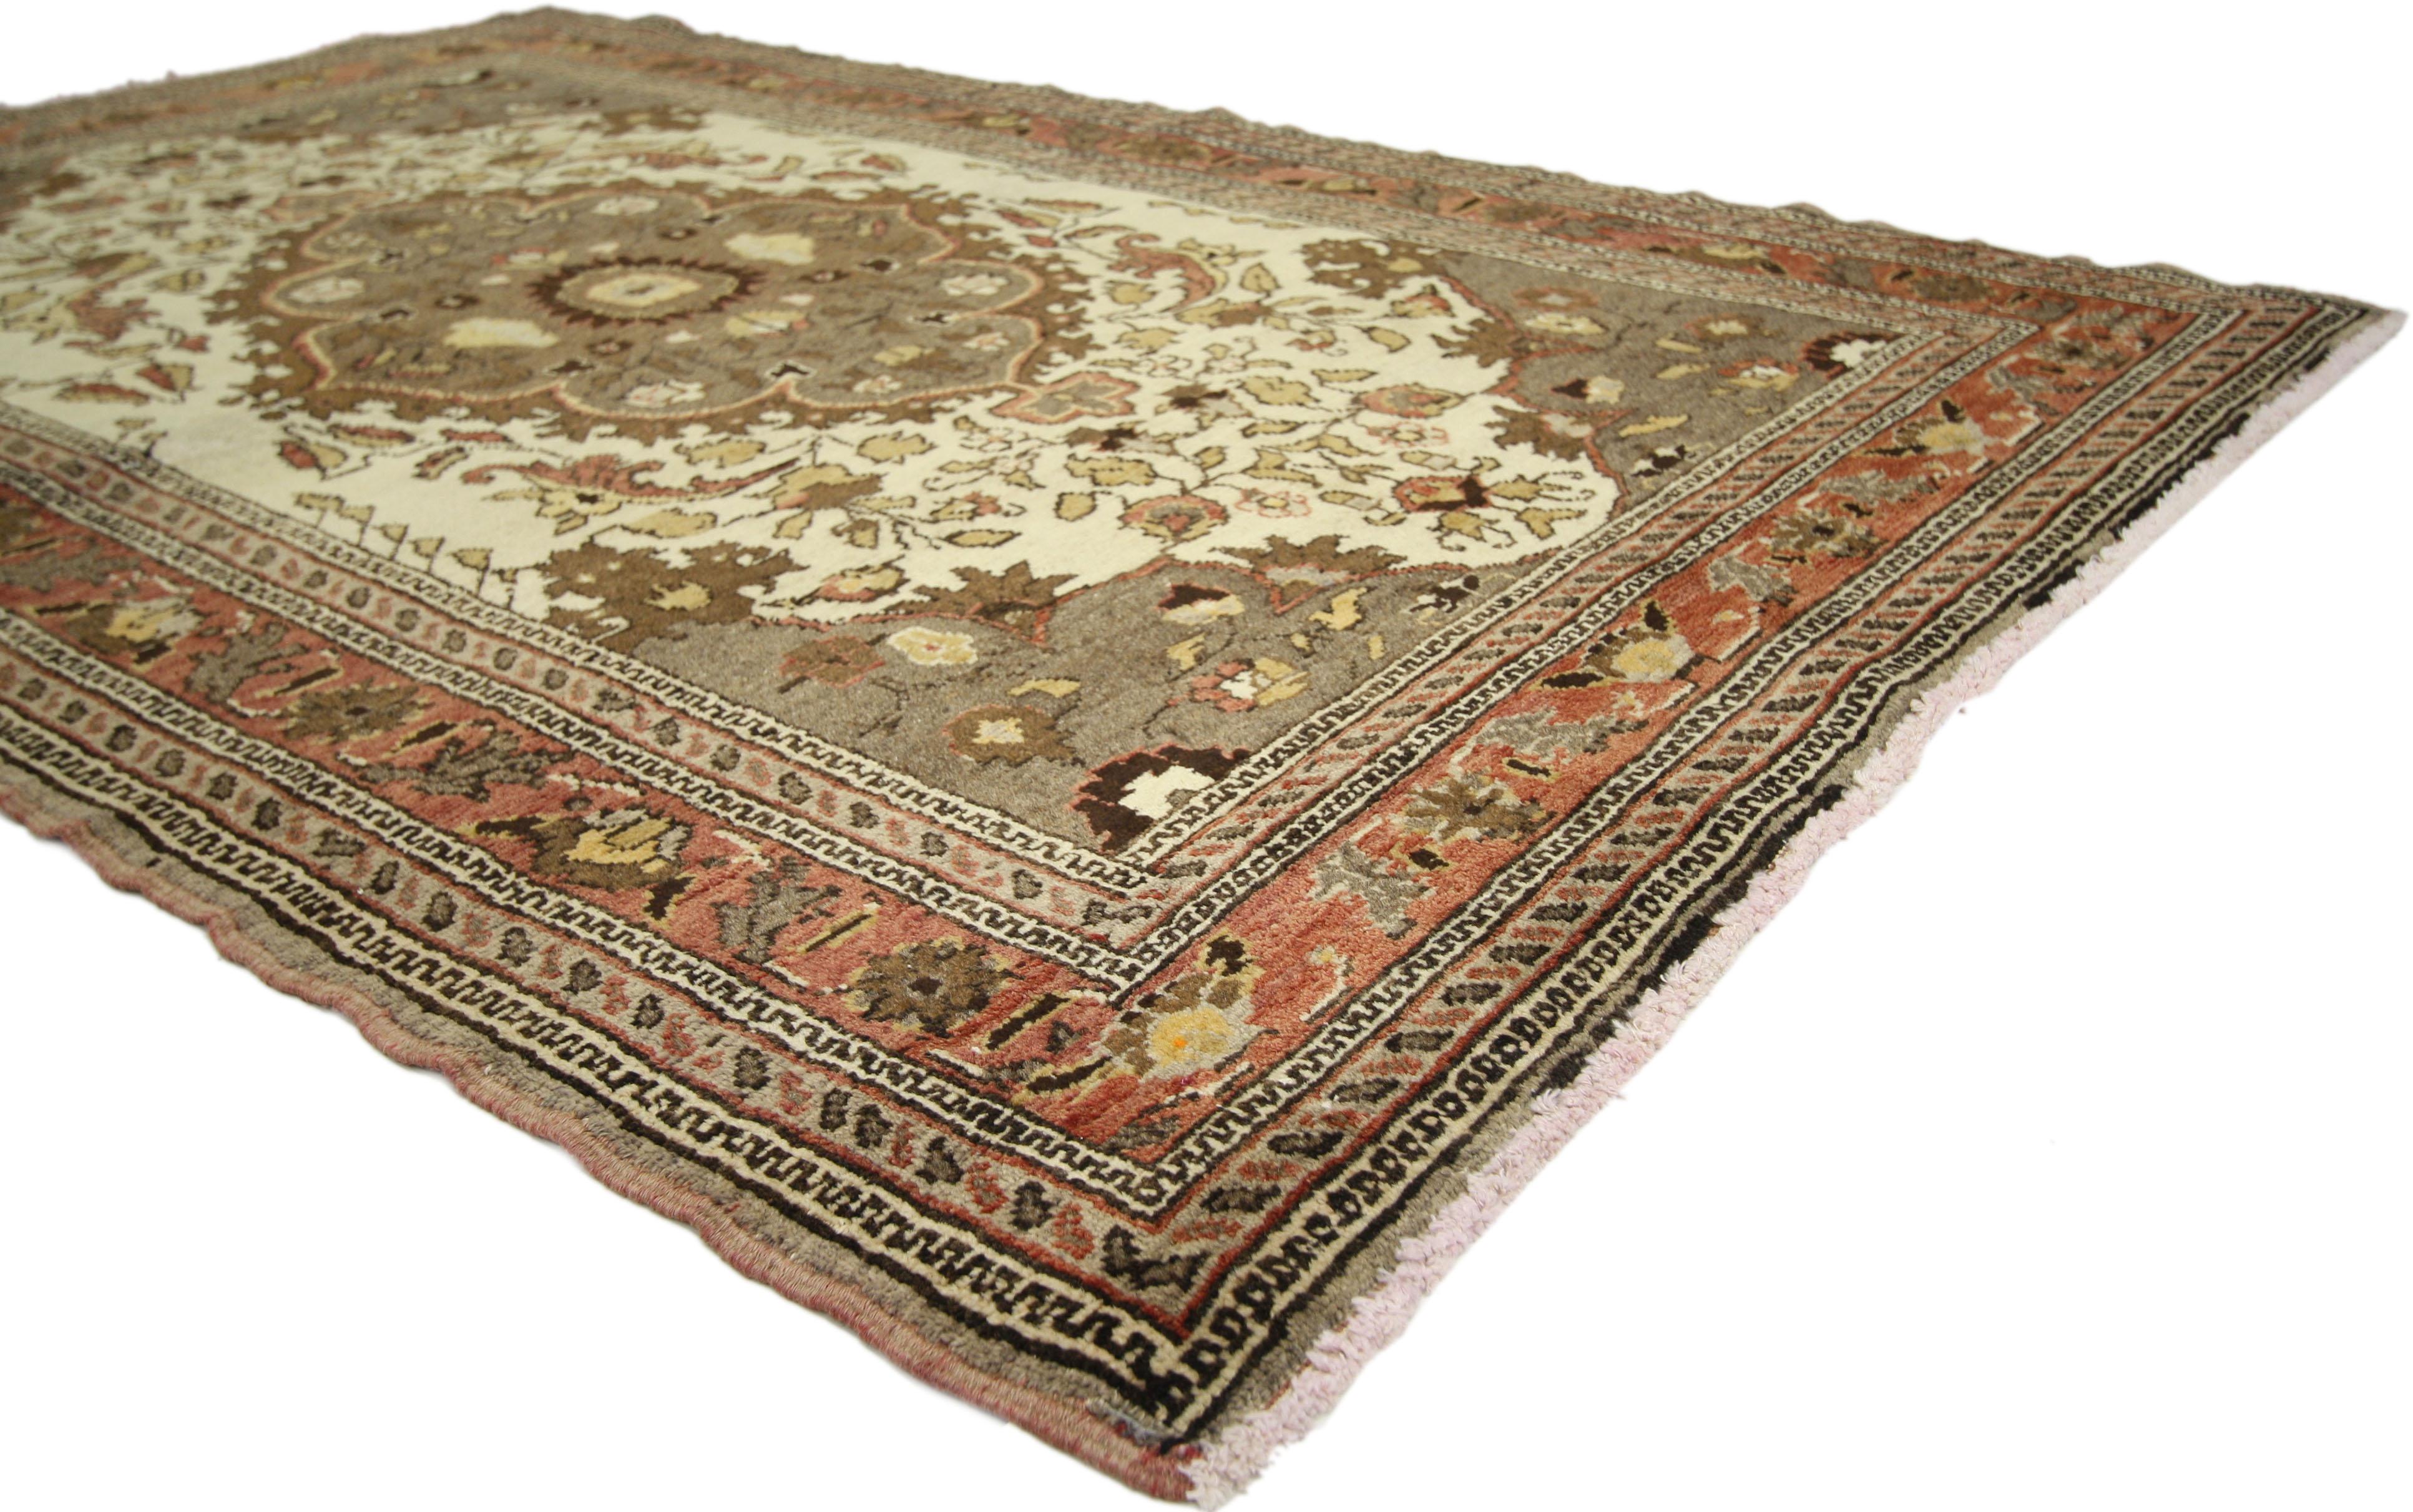 50094, a vintage Turkish Oushak rug with central medallion design. This opulent Turkish Oushak rug features a central medallion of taupe with an overlay of arabesque vines and lush primroses. Spandrels echo the hues of the medallion and contrast